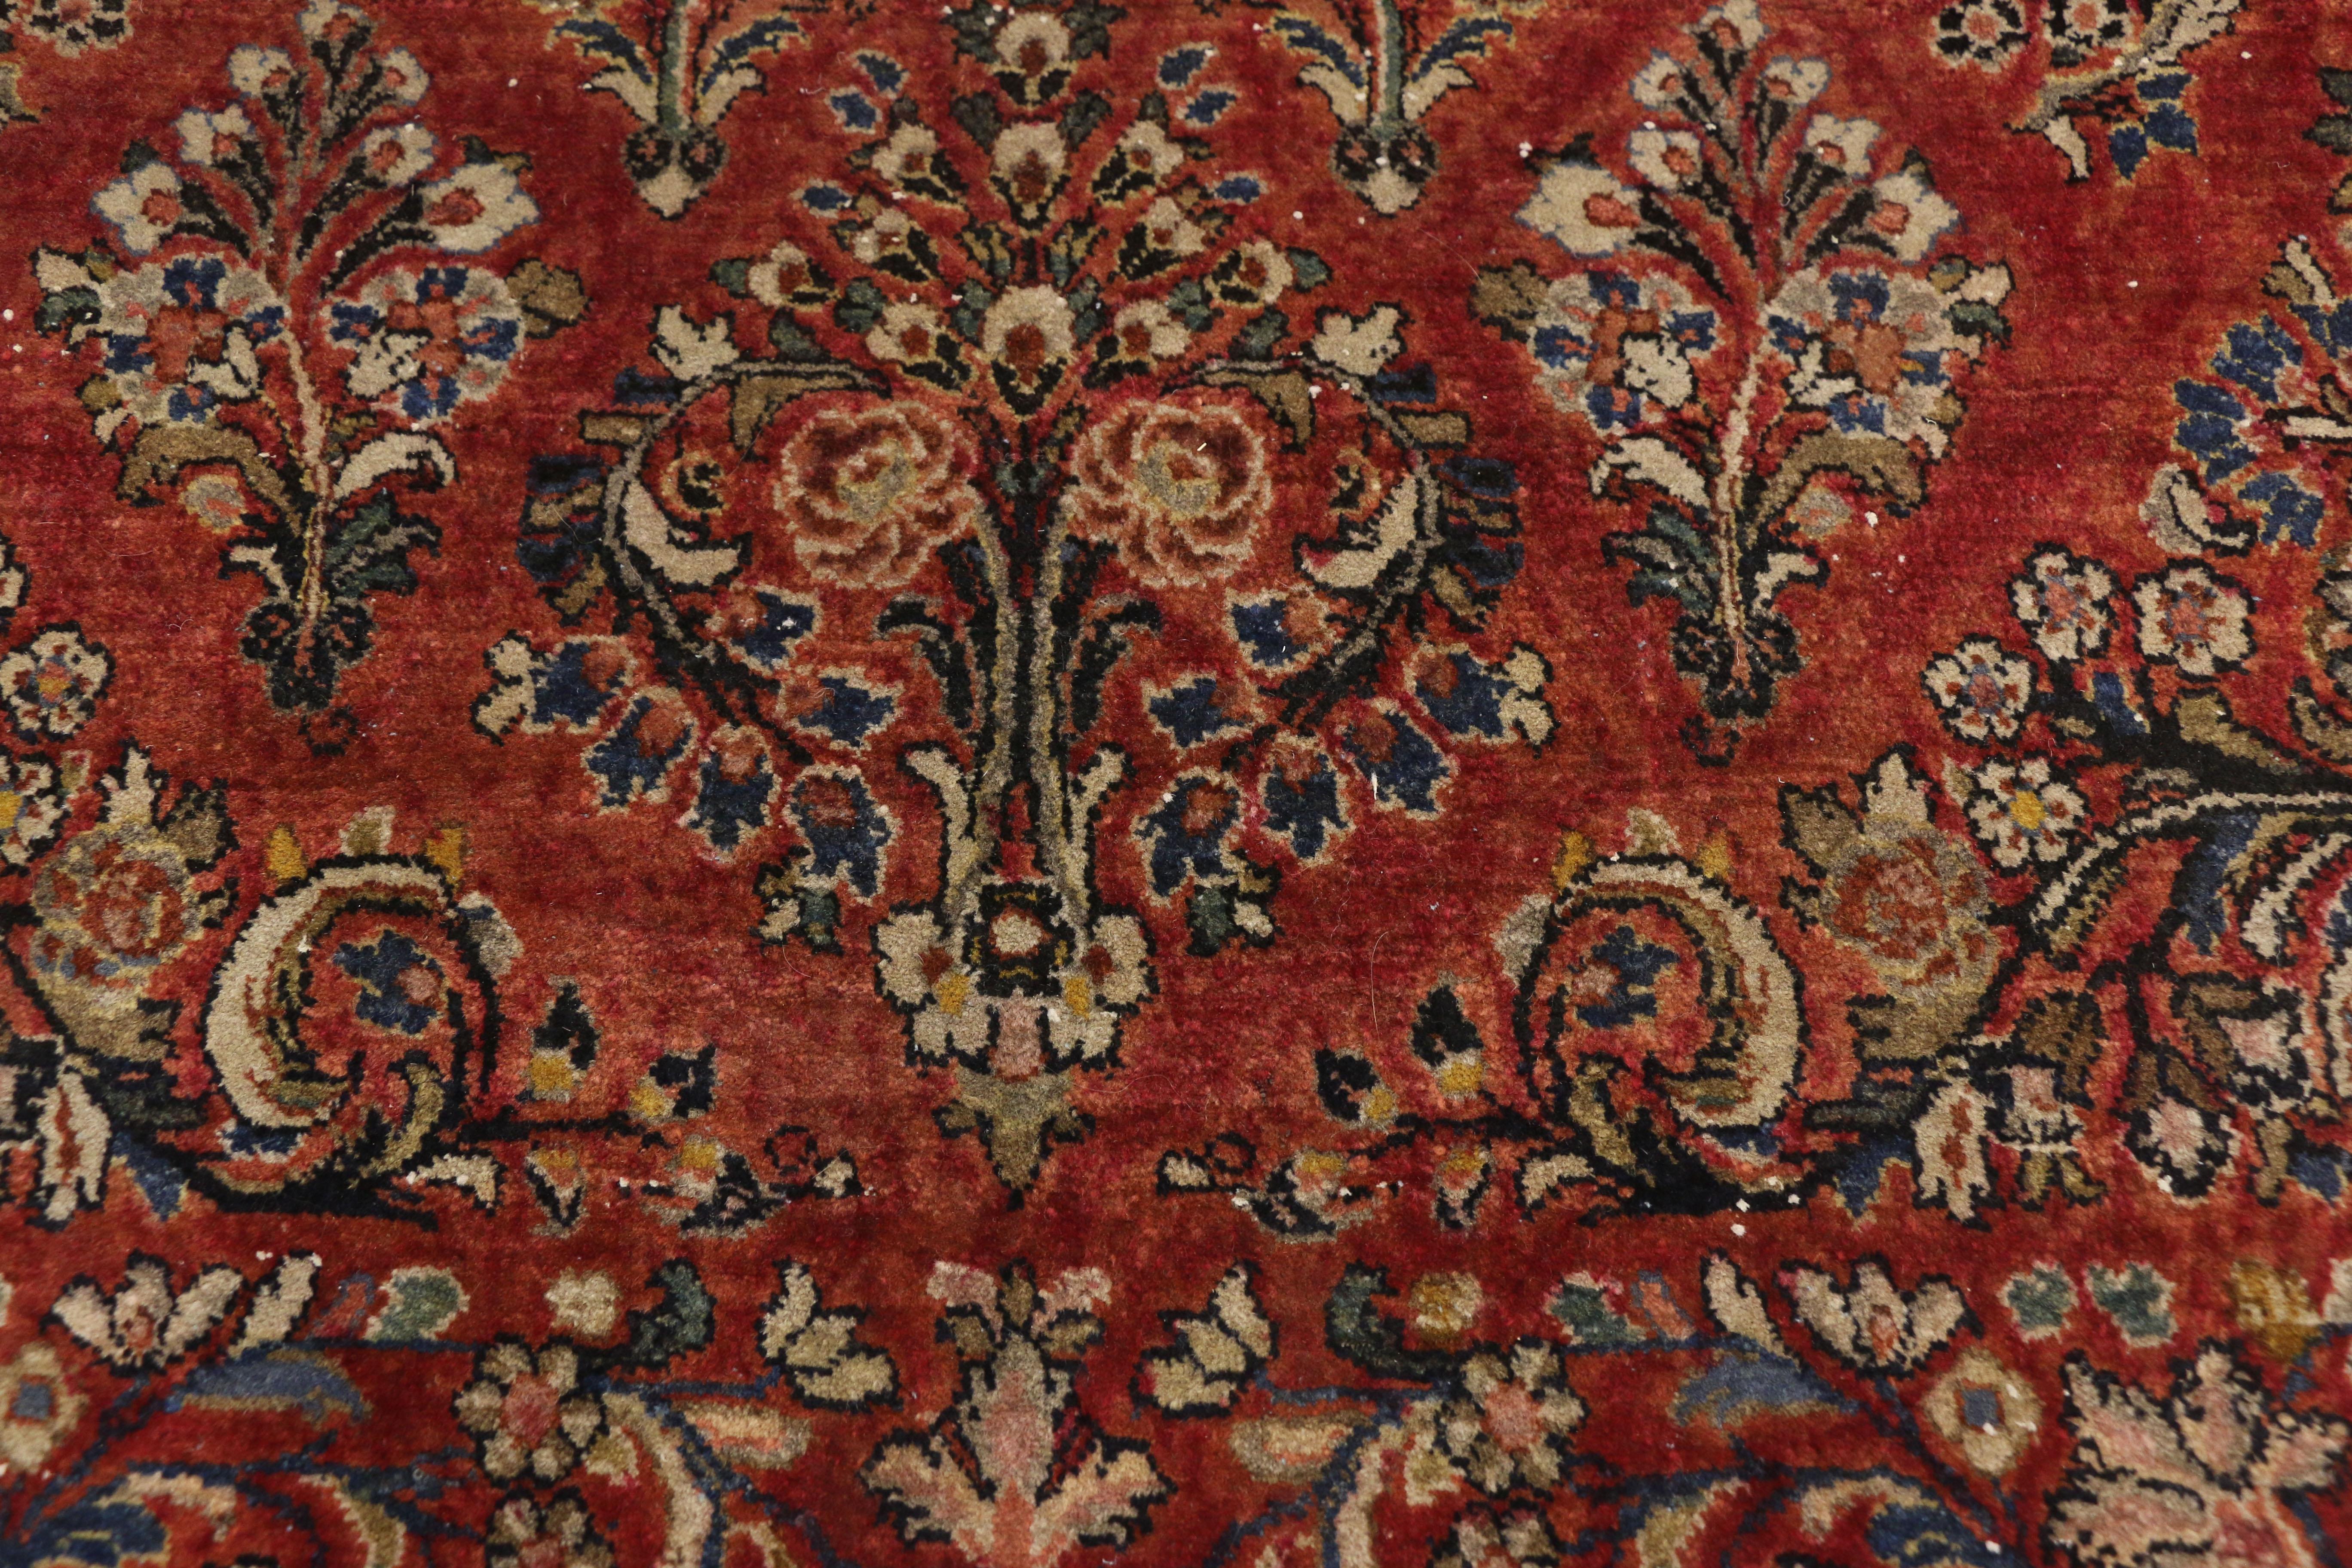 Hand-Knotted Antique Sarouk Persian Rug with Old World Victorian Style